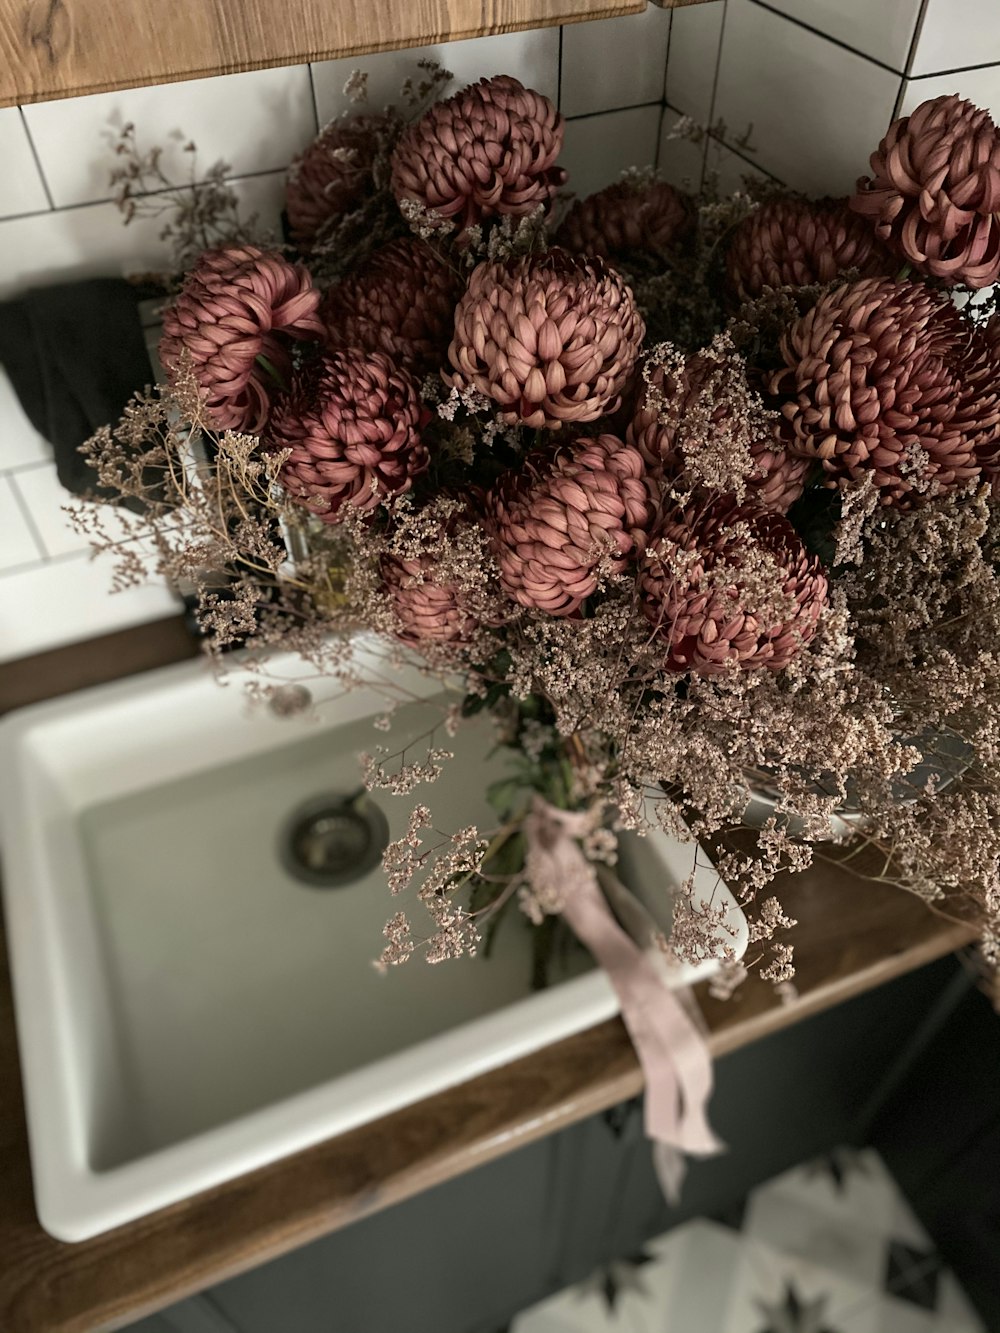 red and brown flowers on white ceramic sink